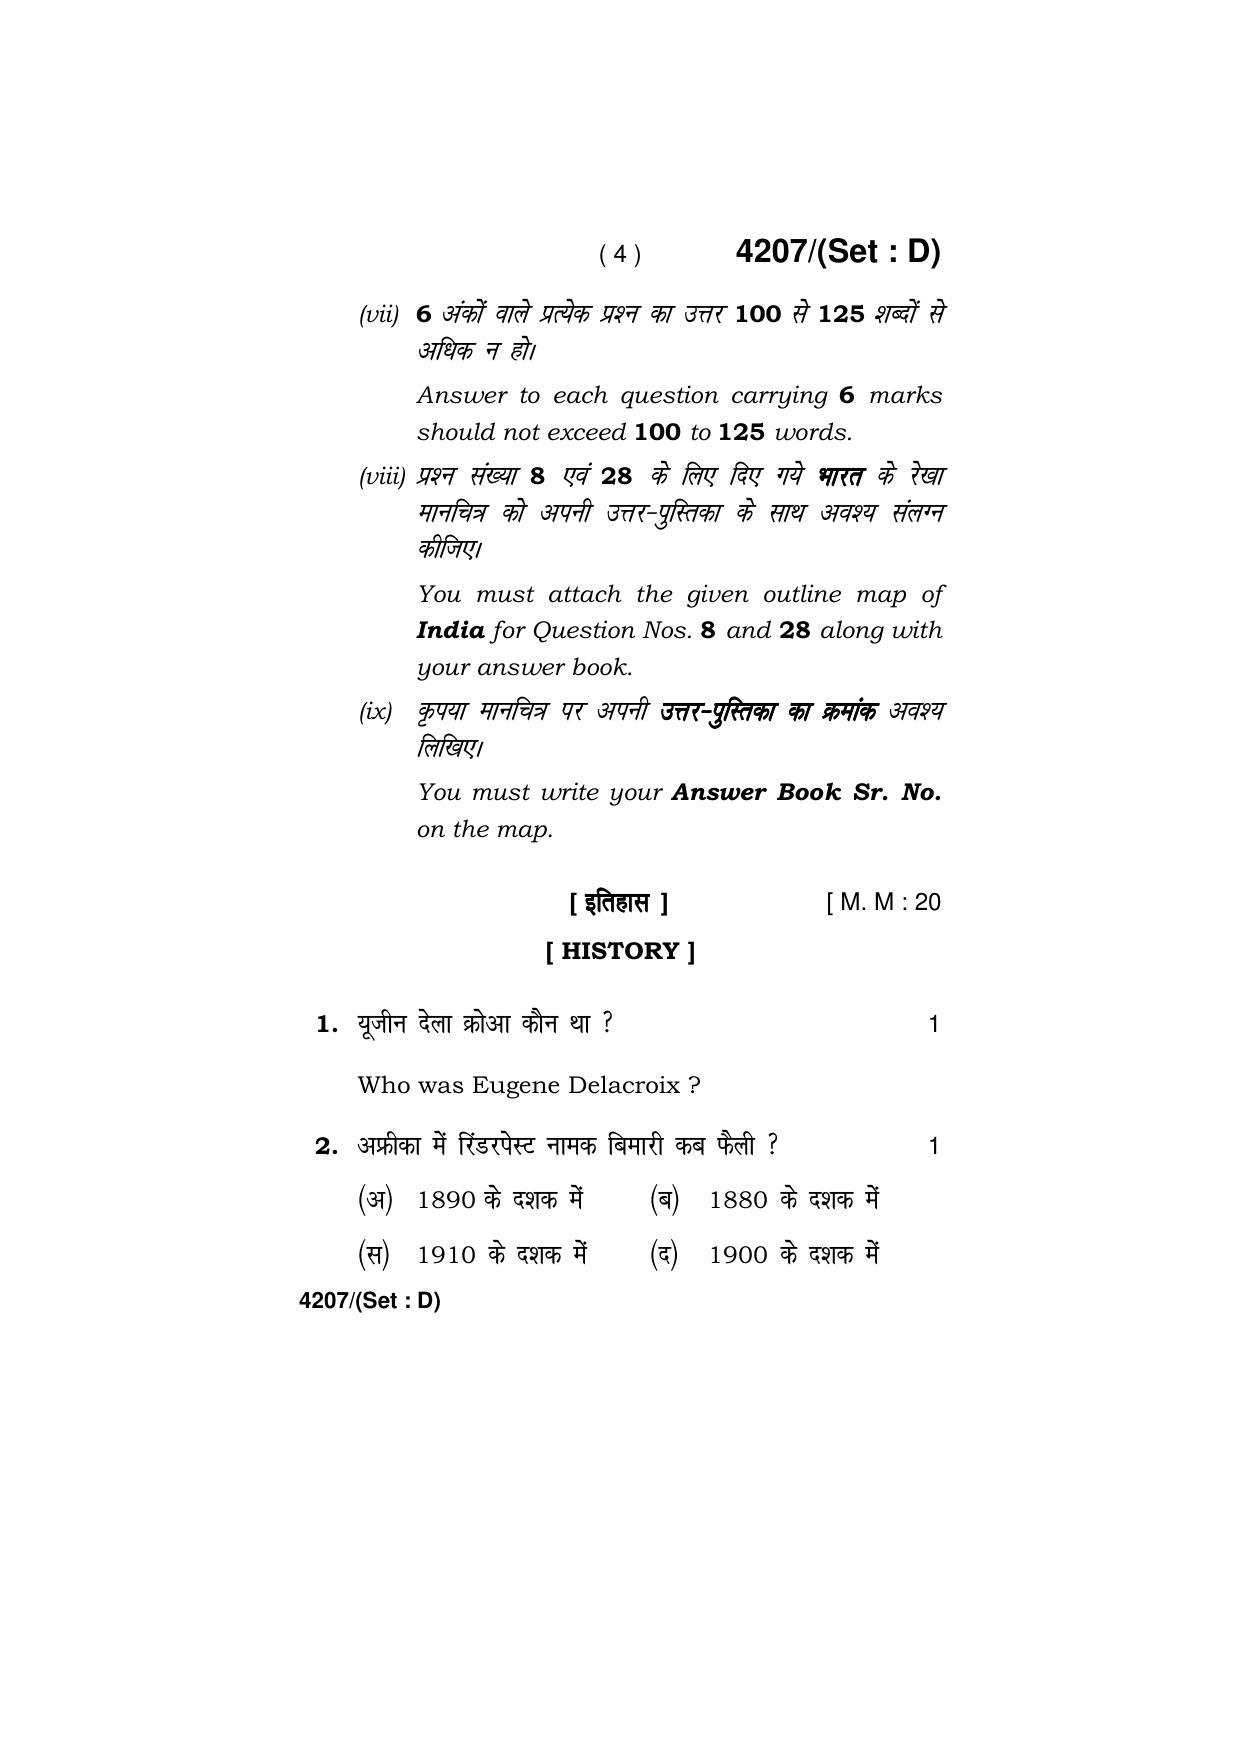 Haryana Board HBSE Class 10 Social Science (All Set) 2019 Question Paper - Page 49